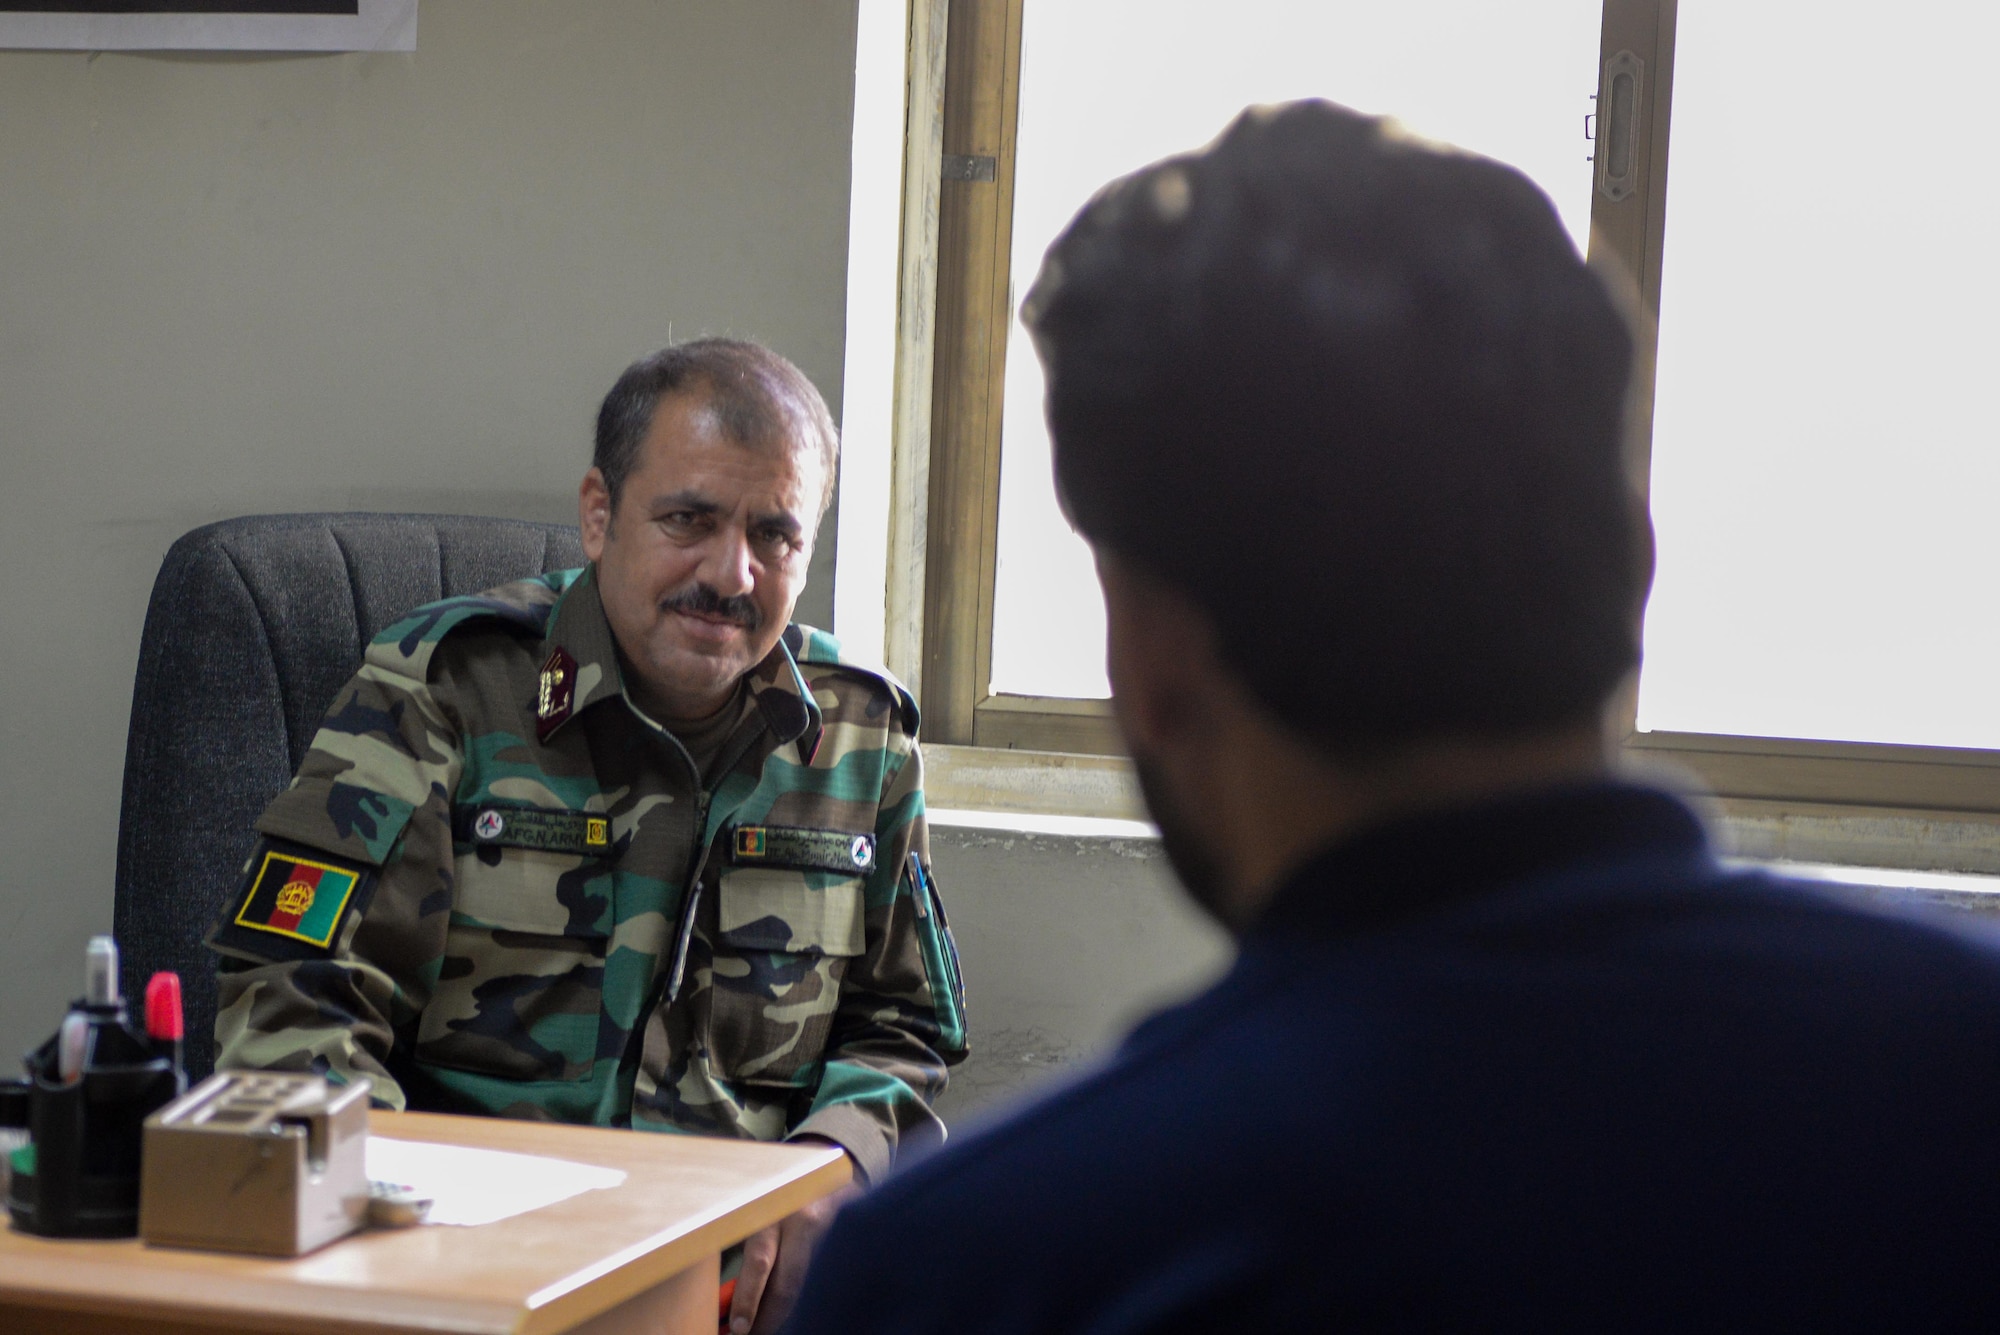 Afghan Air Force Lt. Col. Yaqubi Munir, lead recruiting officer, speaks to an interpreter at Kabul Air Wing, Afghanistan, Aug. 1, 2016. The AAF recruiters have a strong partnership with U.S. Airmen from Train, Advise, Assist Command-Air (TAAC-Air), and the two organizations are constantly fine-tuning the process to get the best and brightest young Afghans into the AAF. (U.S. Air Force photo by Tech. Sgt. Christopher Holmes) 